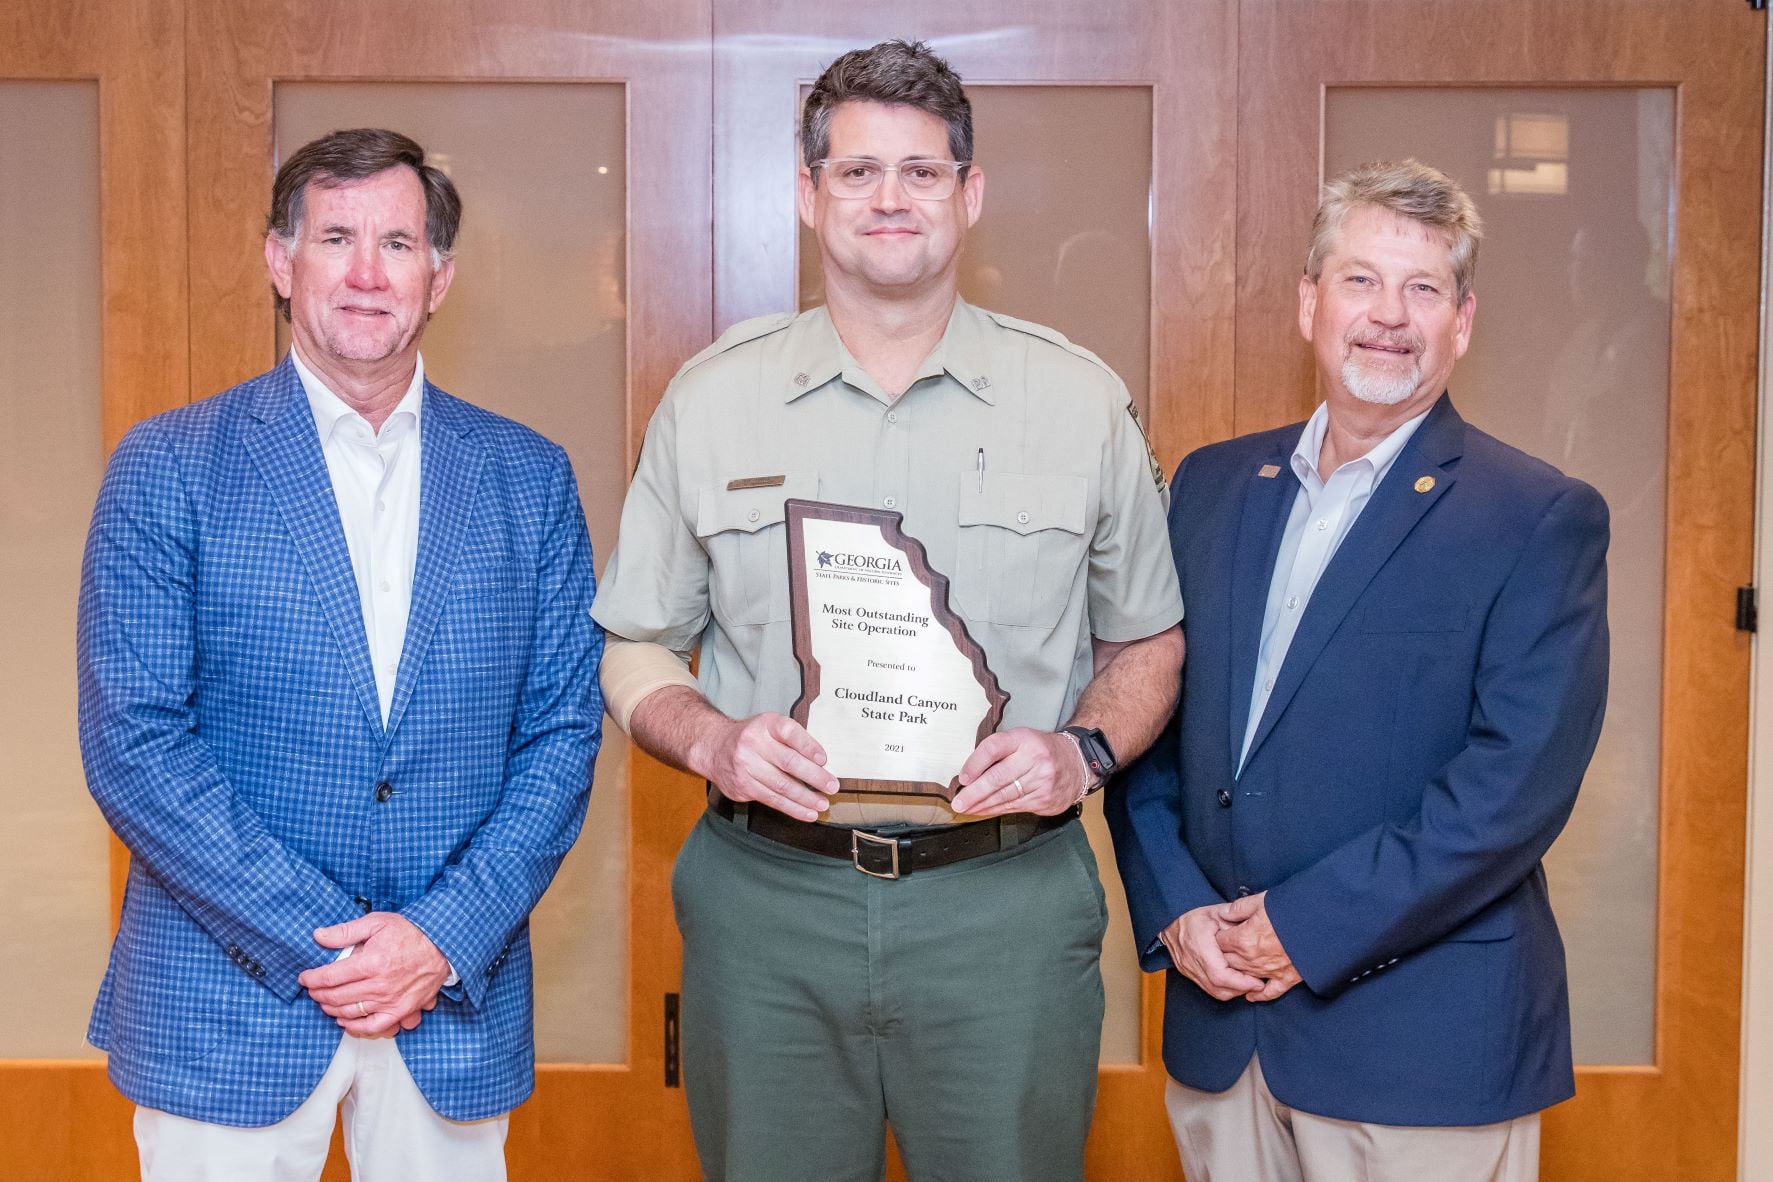 Mark Williams, Brad Gibson and Jeff Cown ga state parks